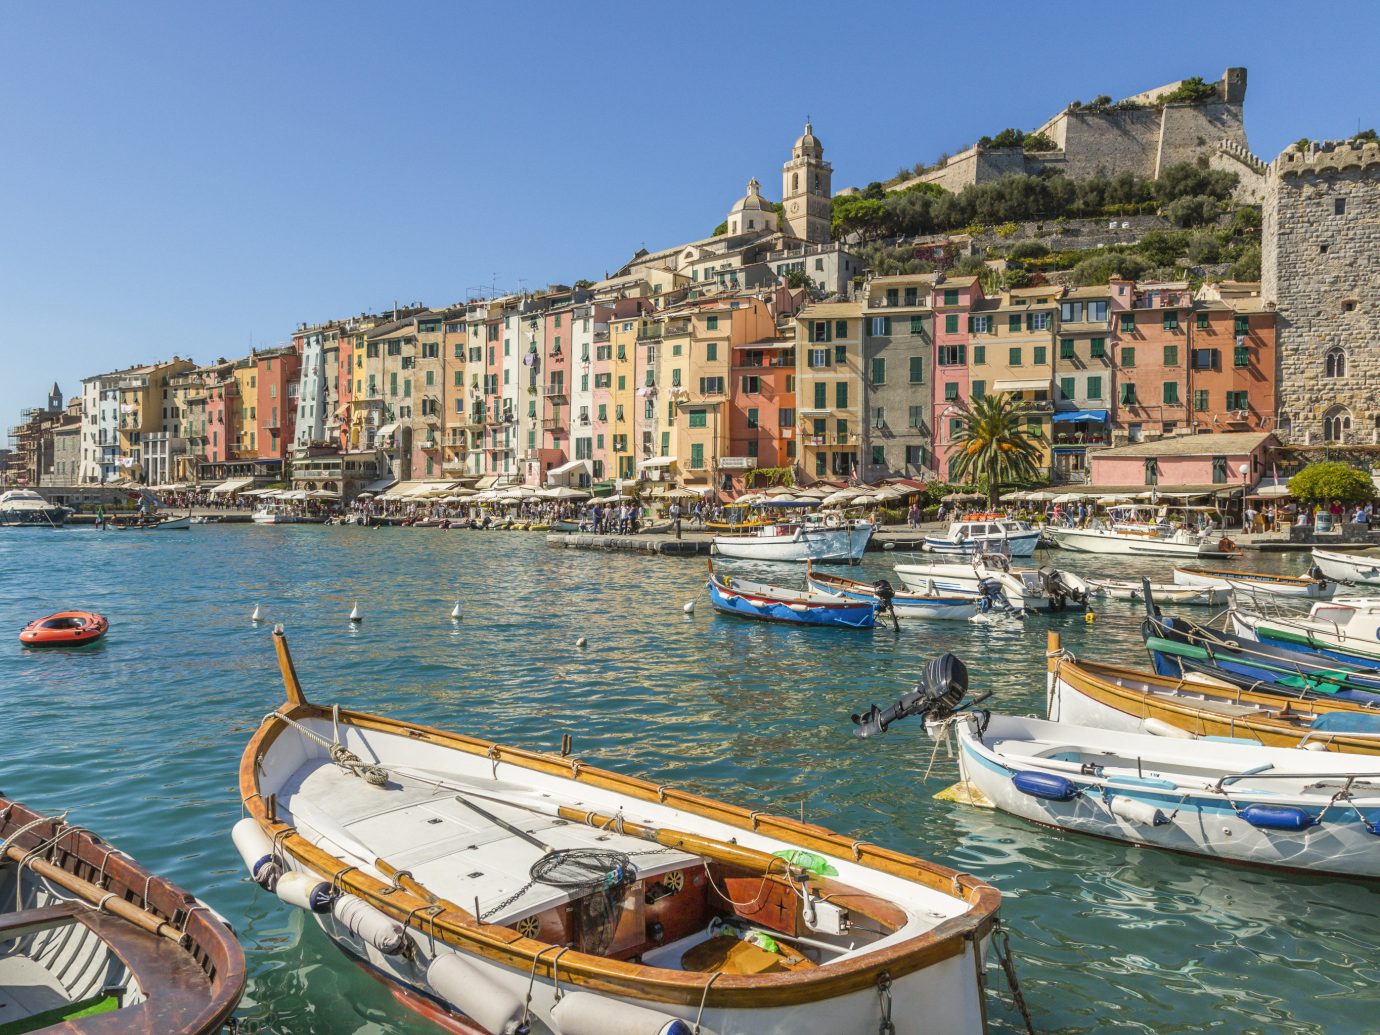 Italy Trip Ideas waterway body of water water Harbor water transportation sky Sea Boat watercraft port City tourism marina boating Coast reflection channel Canal vehicle